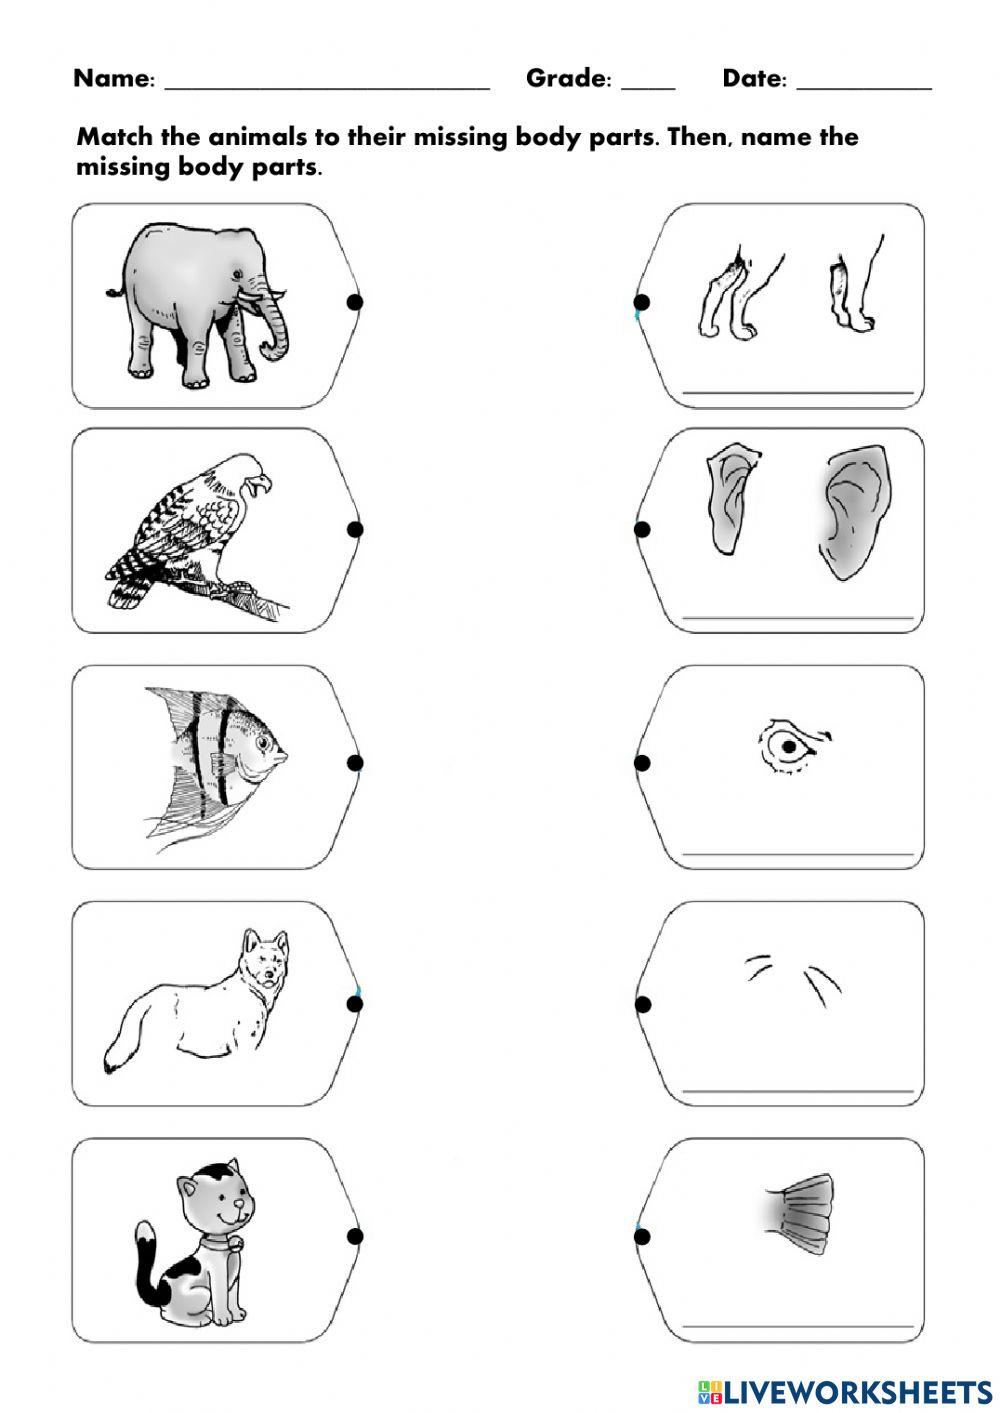 Movements and Parts of Animals